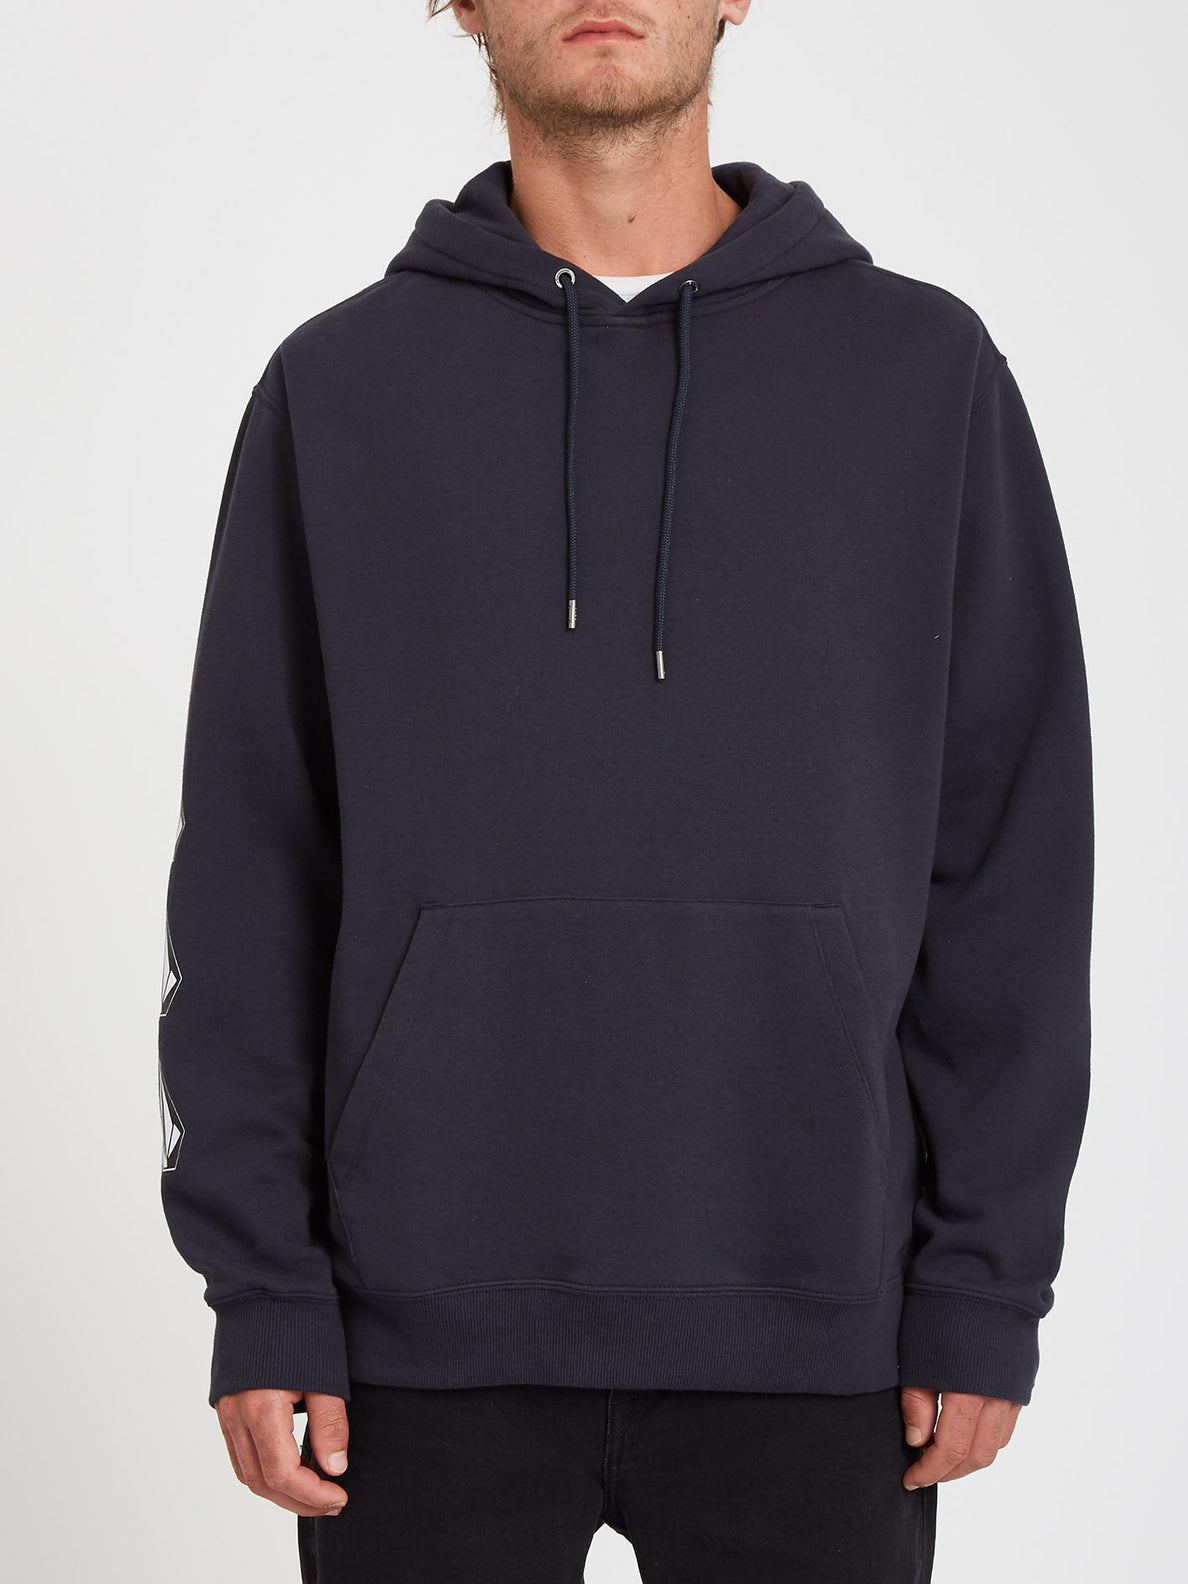 Iconic Stone Hoodie - NAVY (A4132103_NVY) [F]